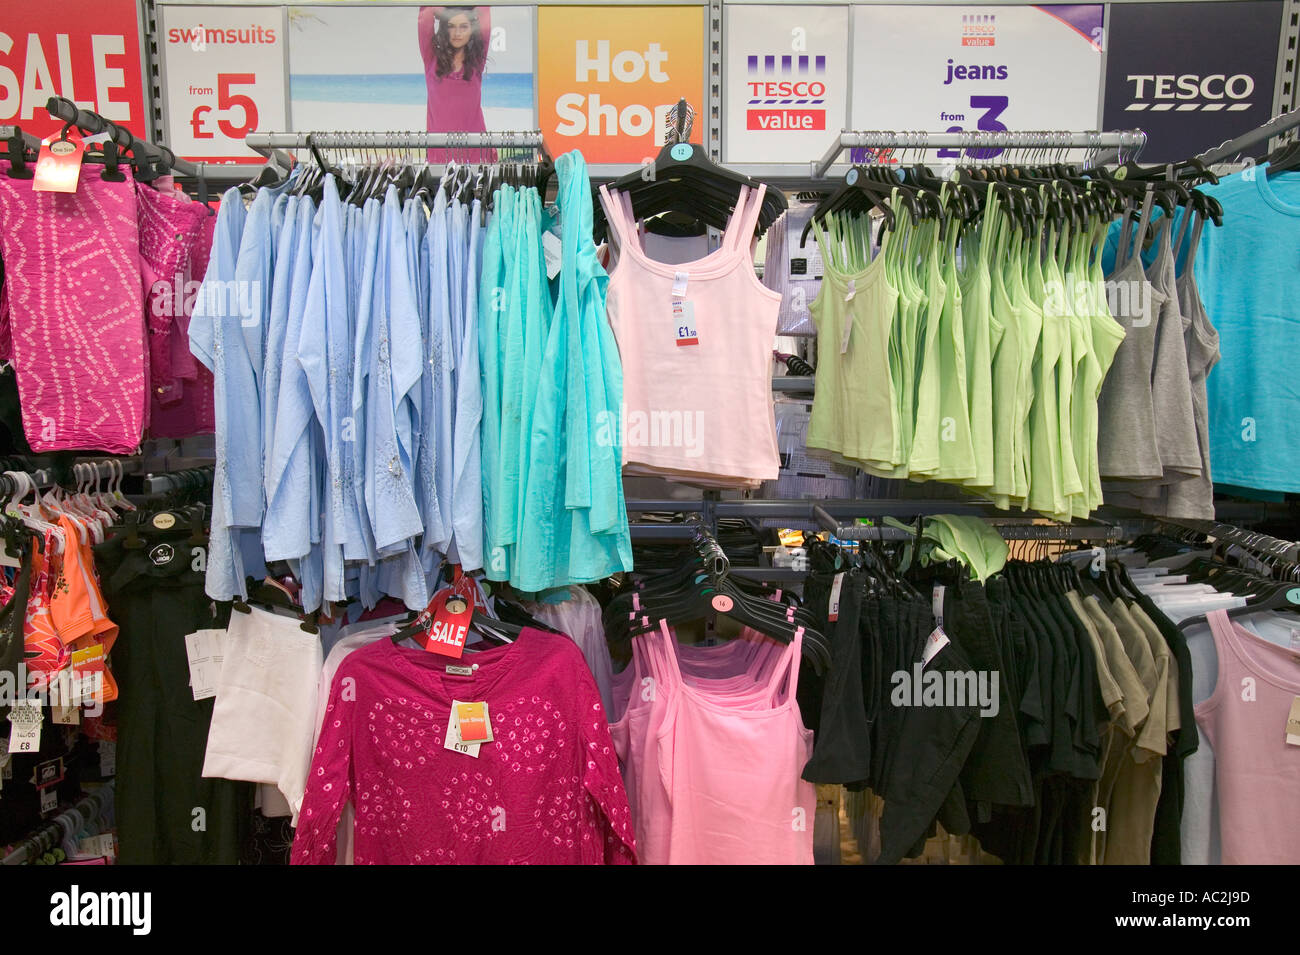 Tesco clothing range for sale in a Tescos supermarket Stock Photo